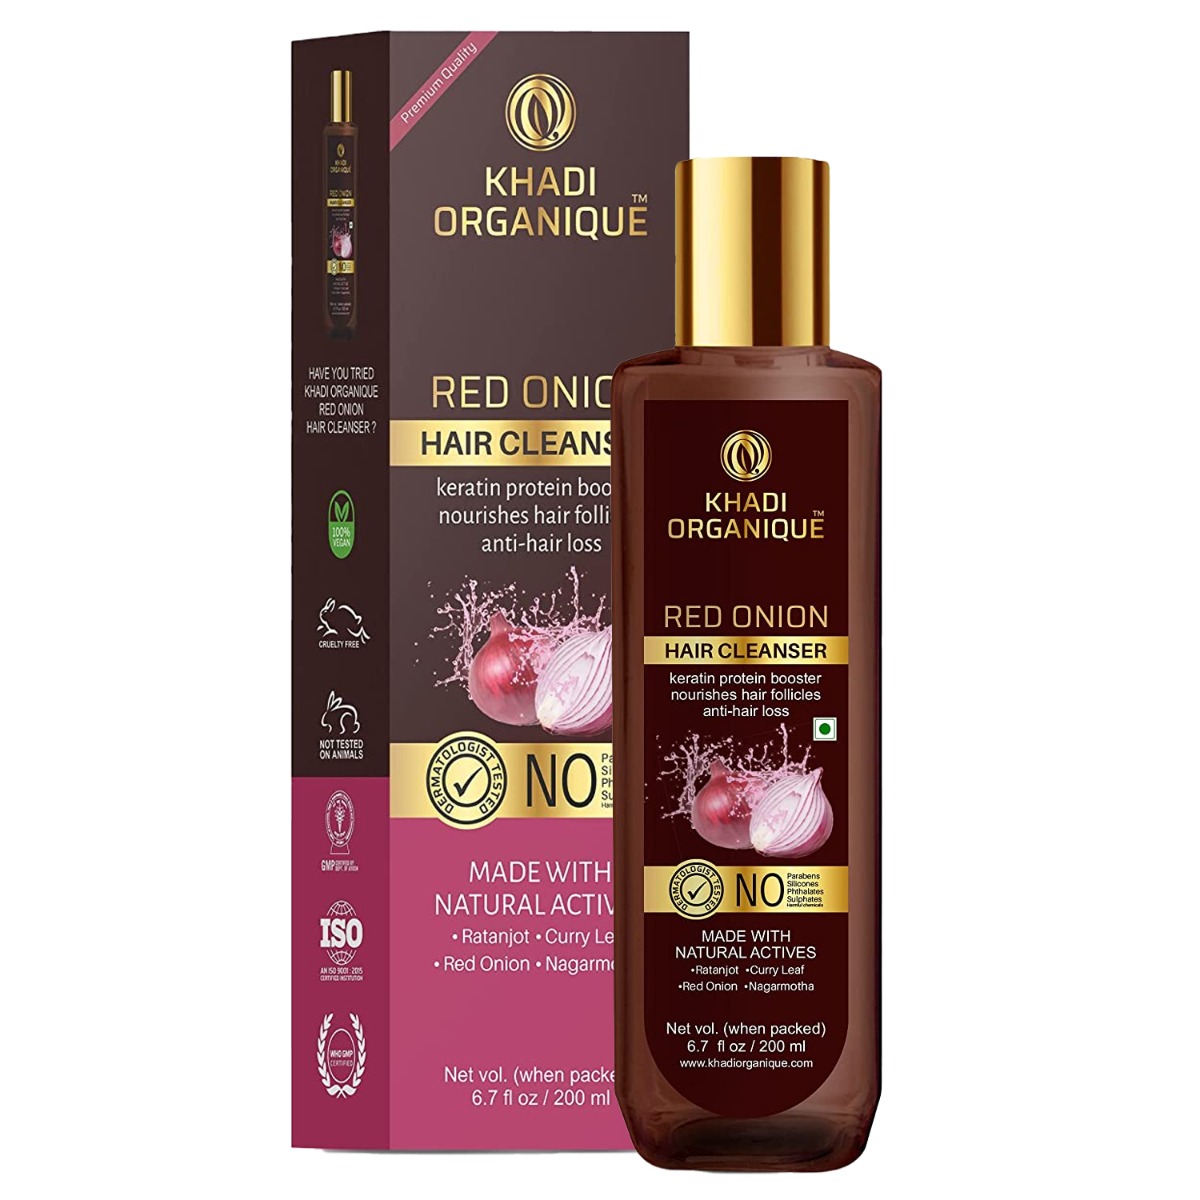 Khadi Organique Red Onion Hair Conditioner With Keratin Protein Booster, 200ml